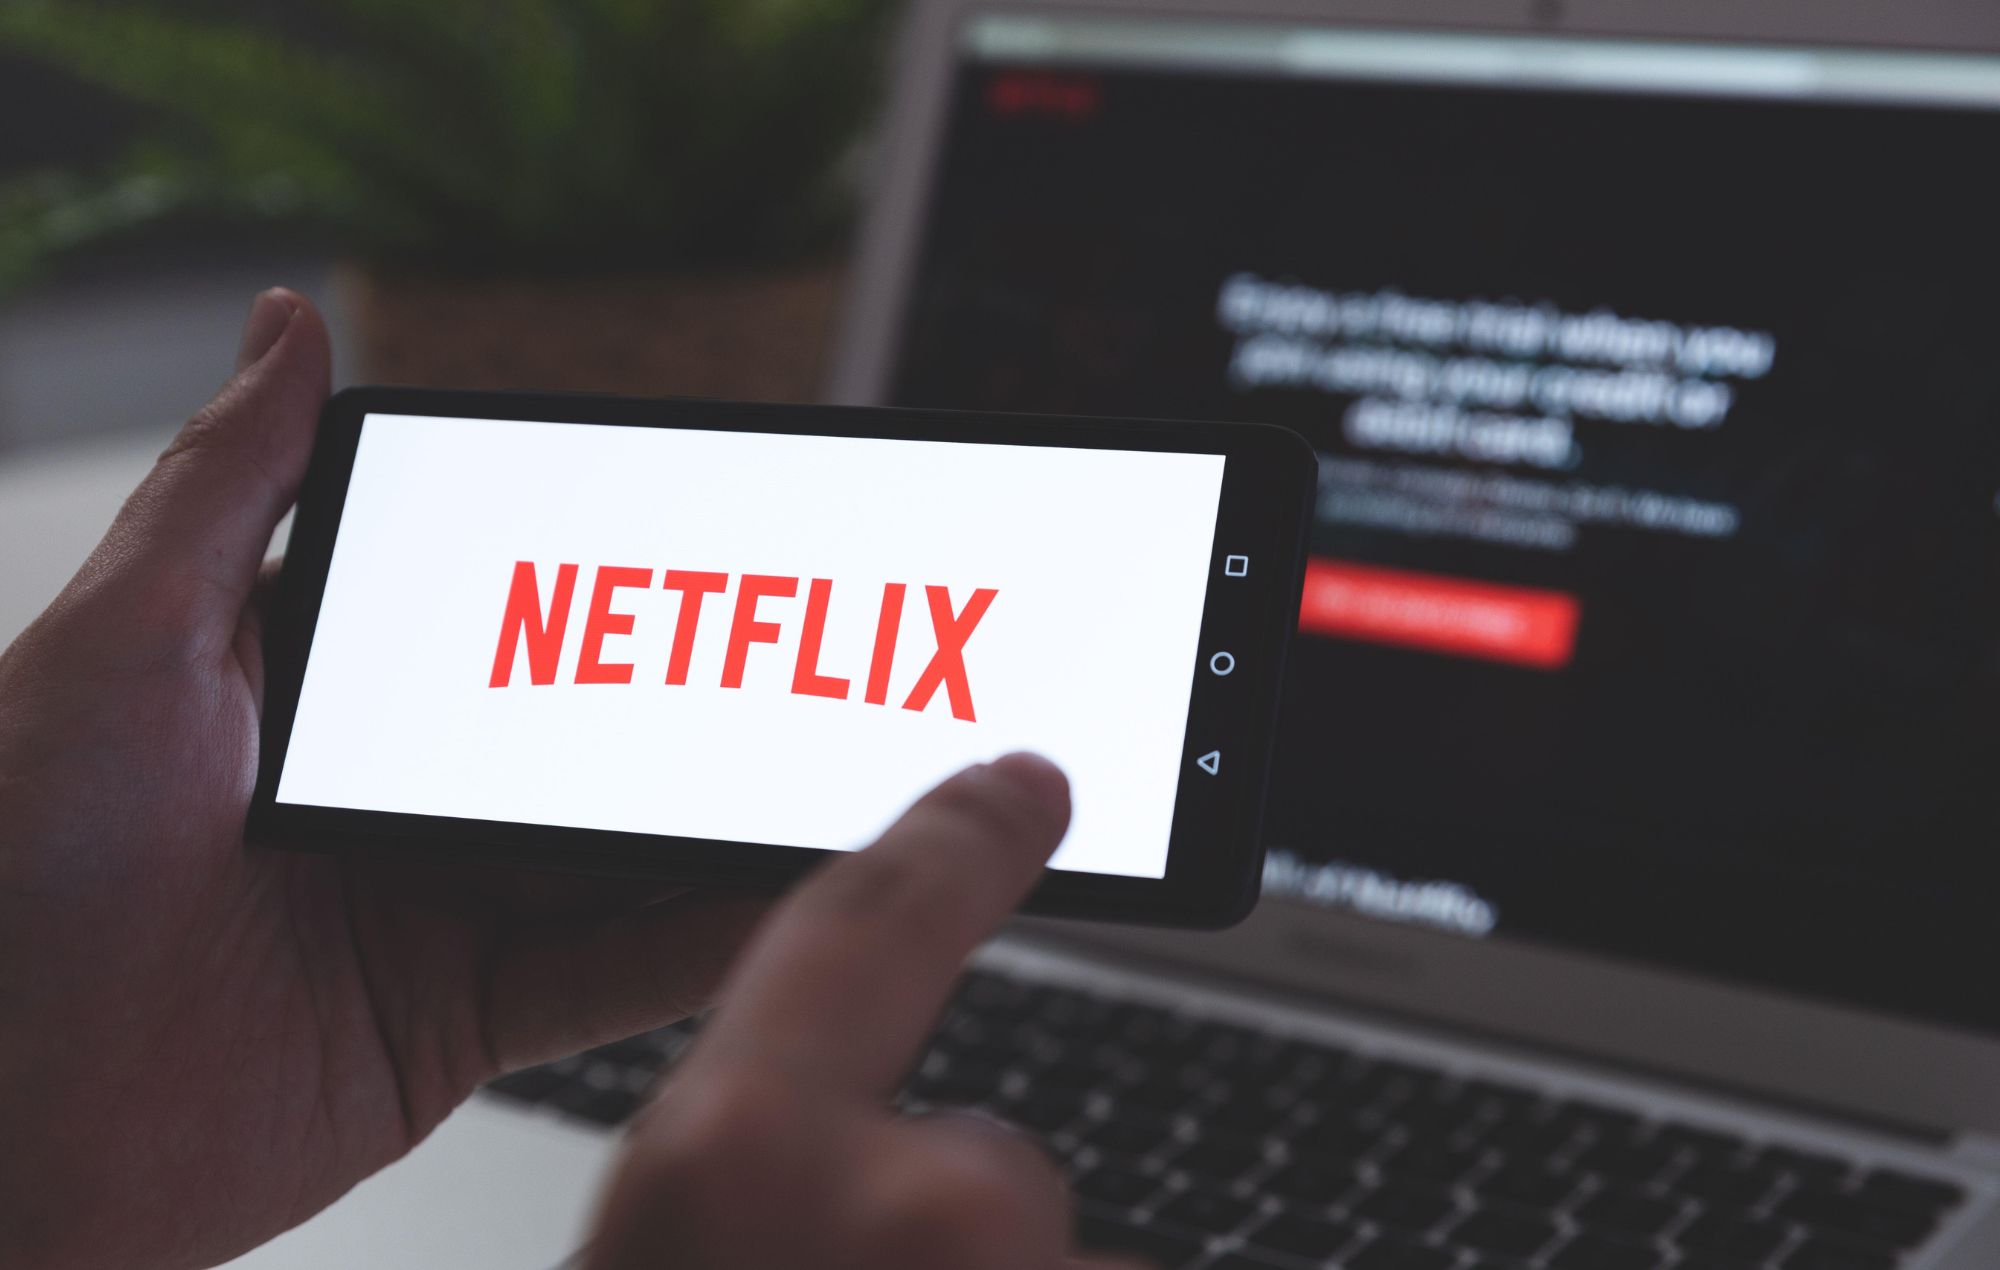 Stock image of a Man with Netflix logo on screen.